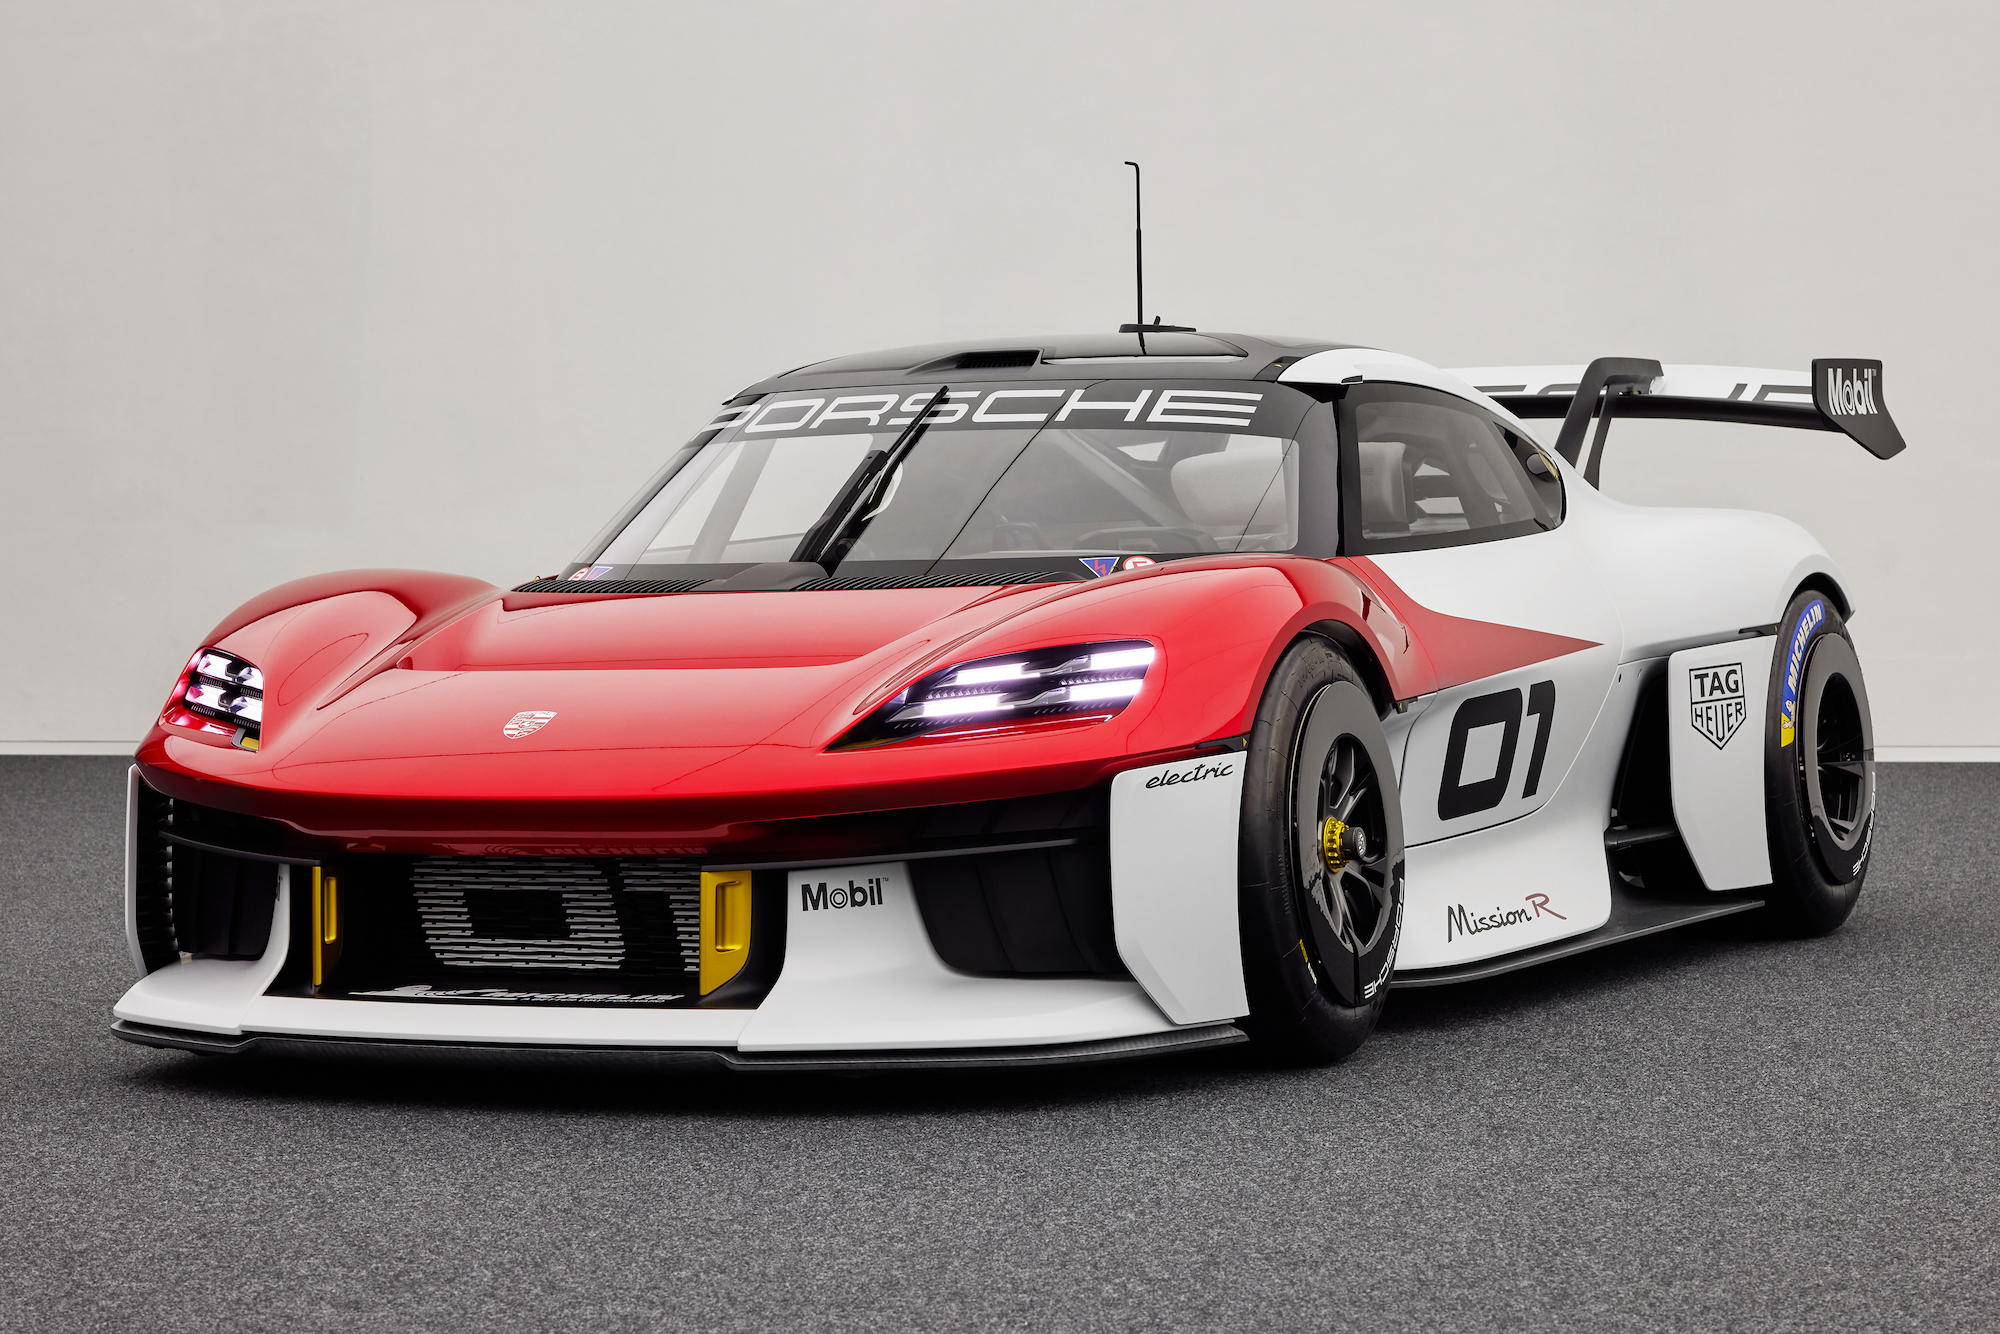 The Mission R is an electric Porsche race car meant for livestreaming